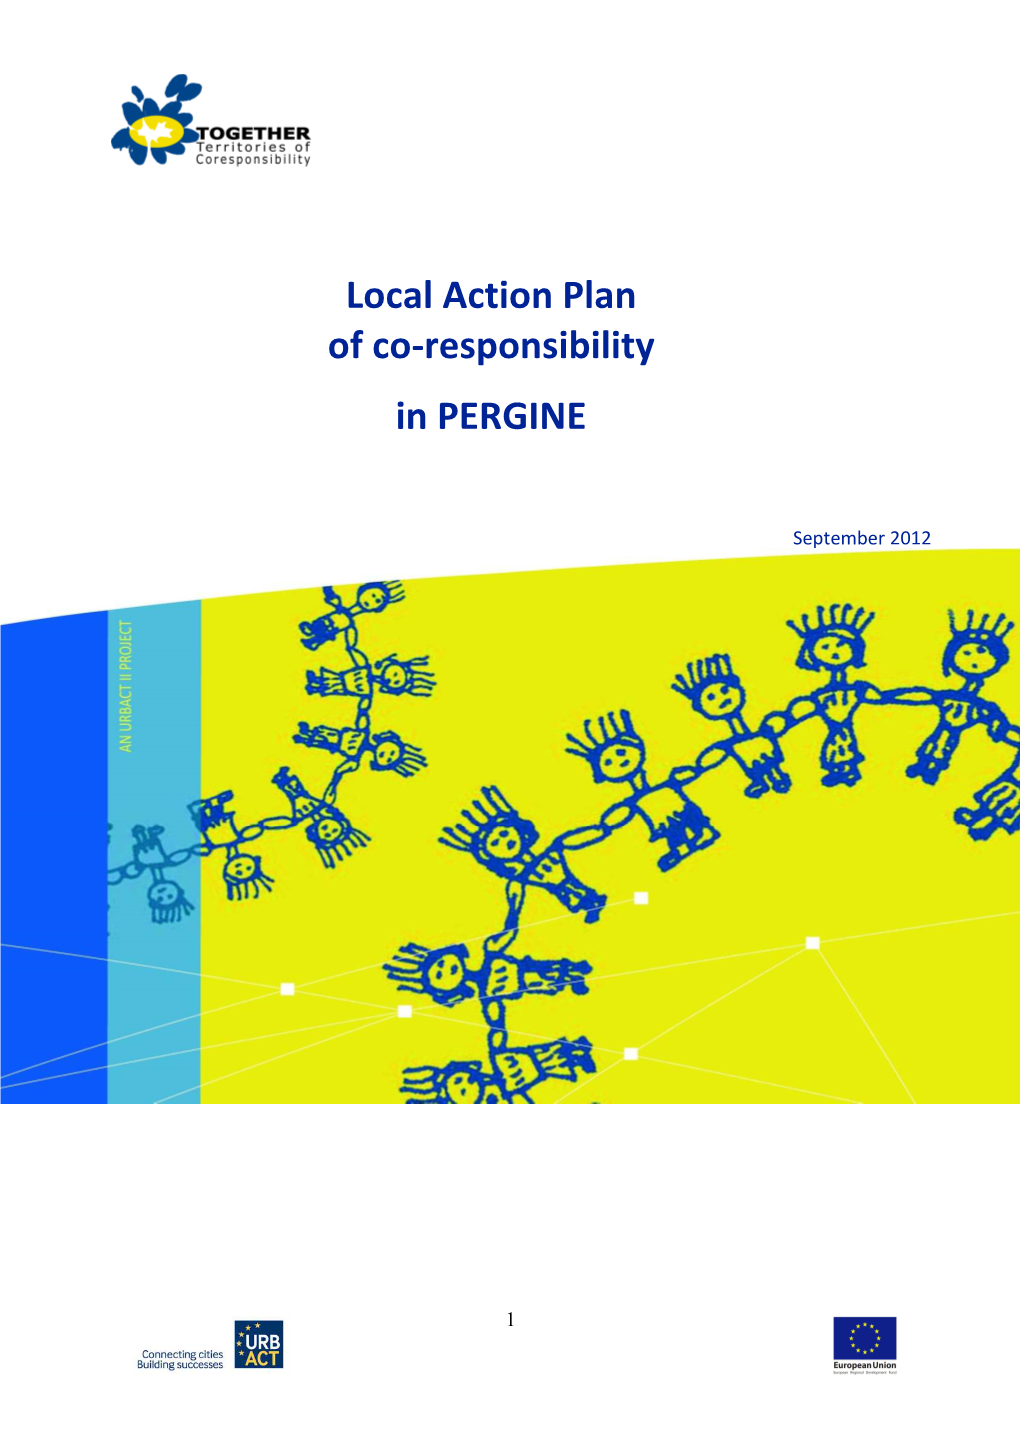 Local Action Plan of Co-Responsibility in PERGINE